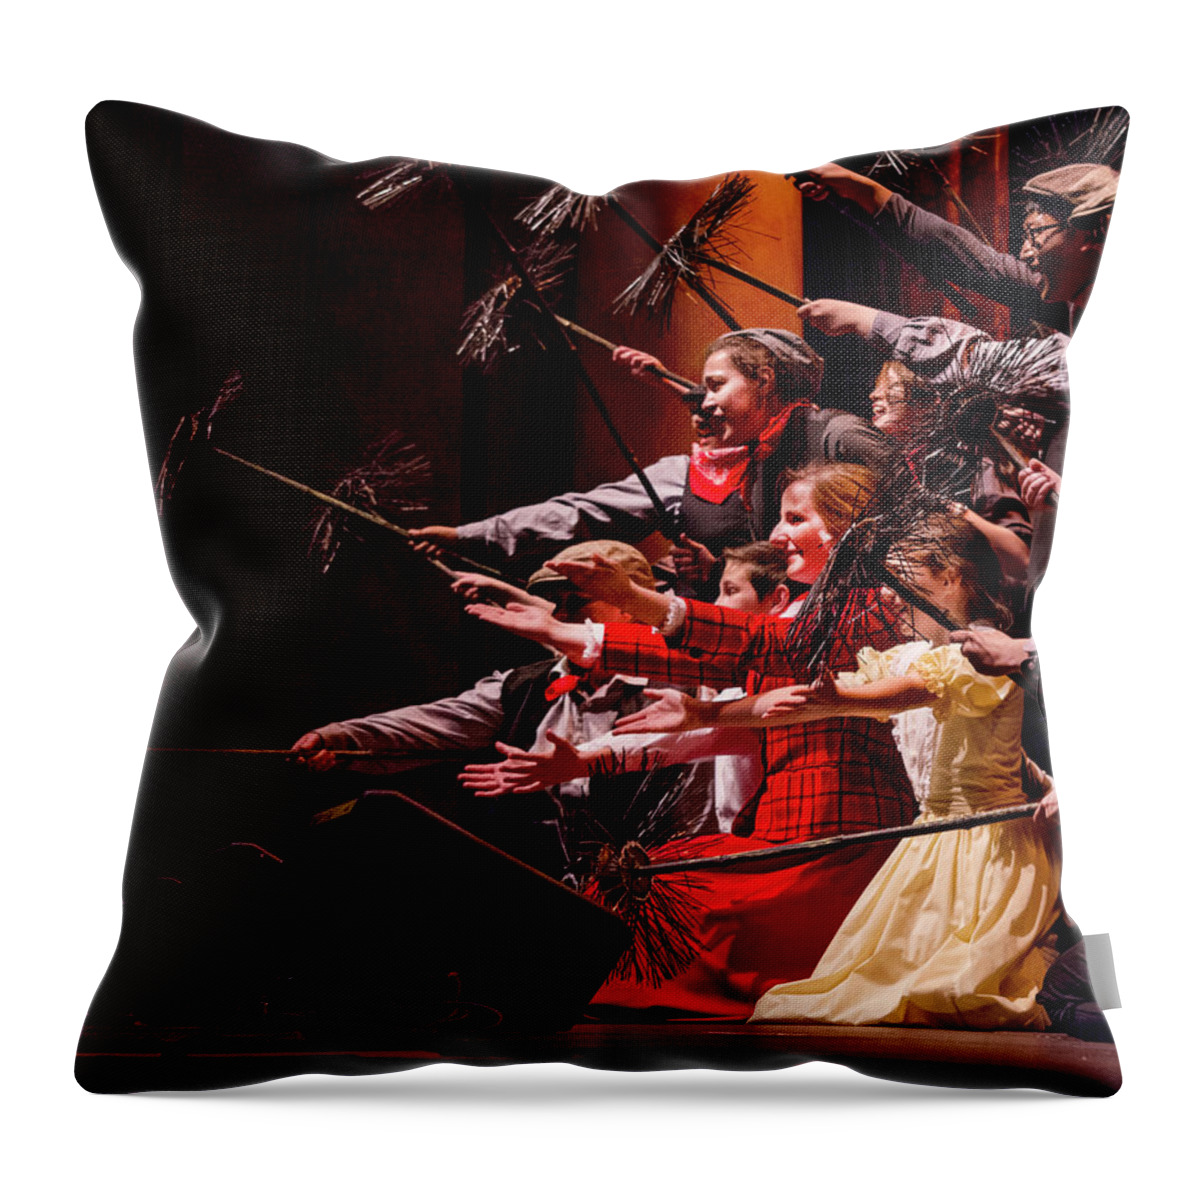 The Totem Pole Throw Pillow featuring the photograph Tpa002 by Andy Smetzer